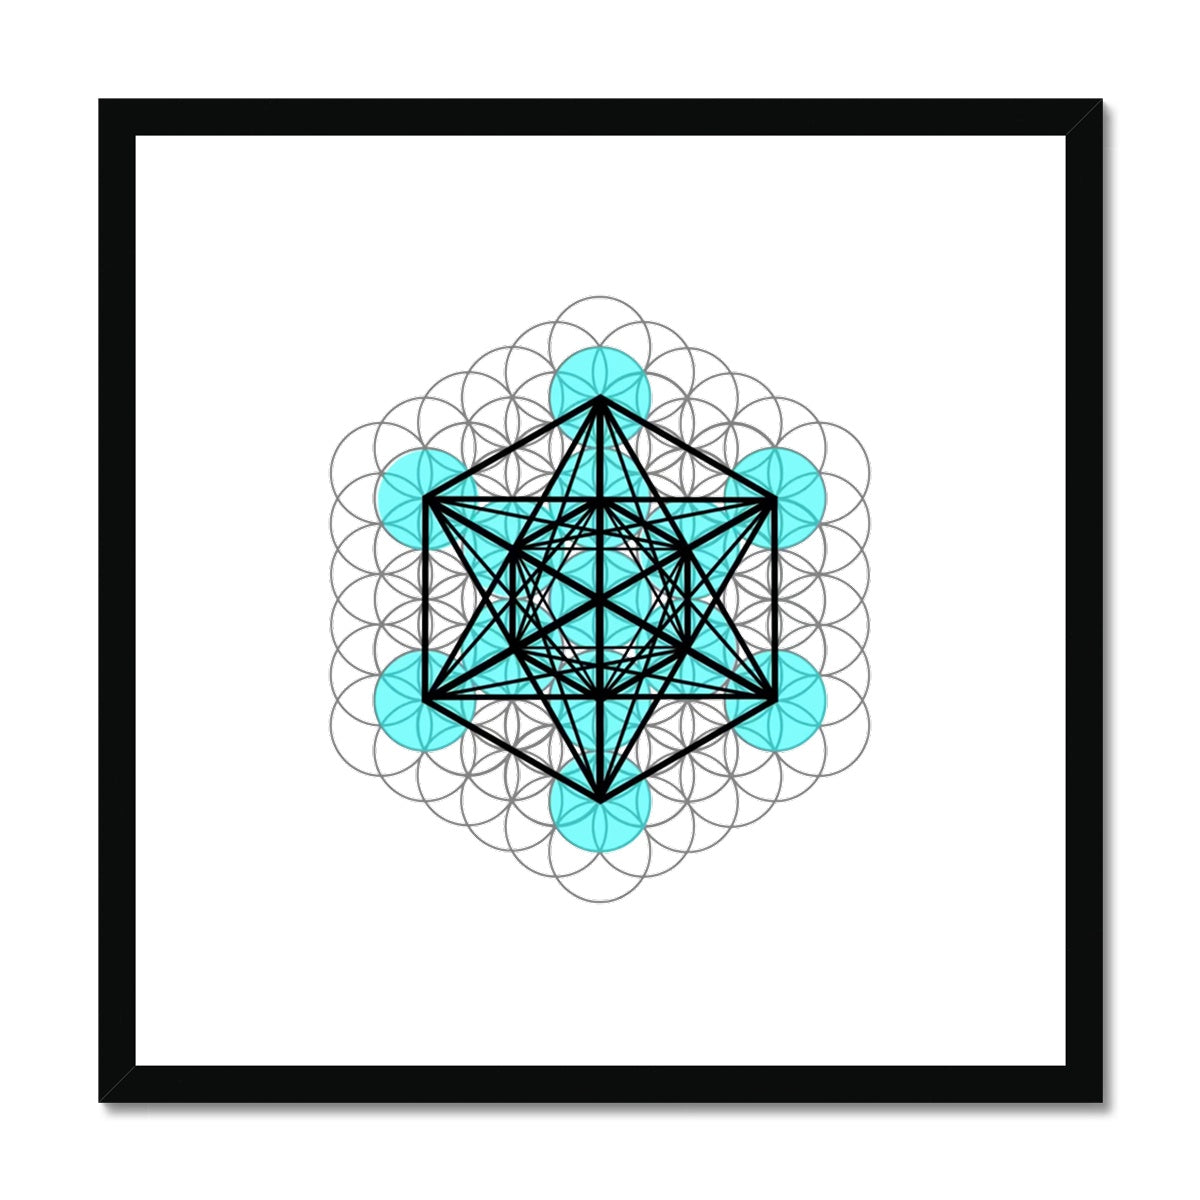 Fruit of Life, Metatron’s Cube Framed & Mounted Print - Nature of Flowers